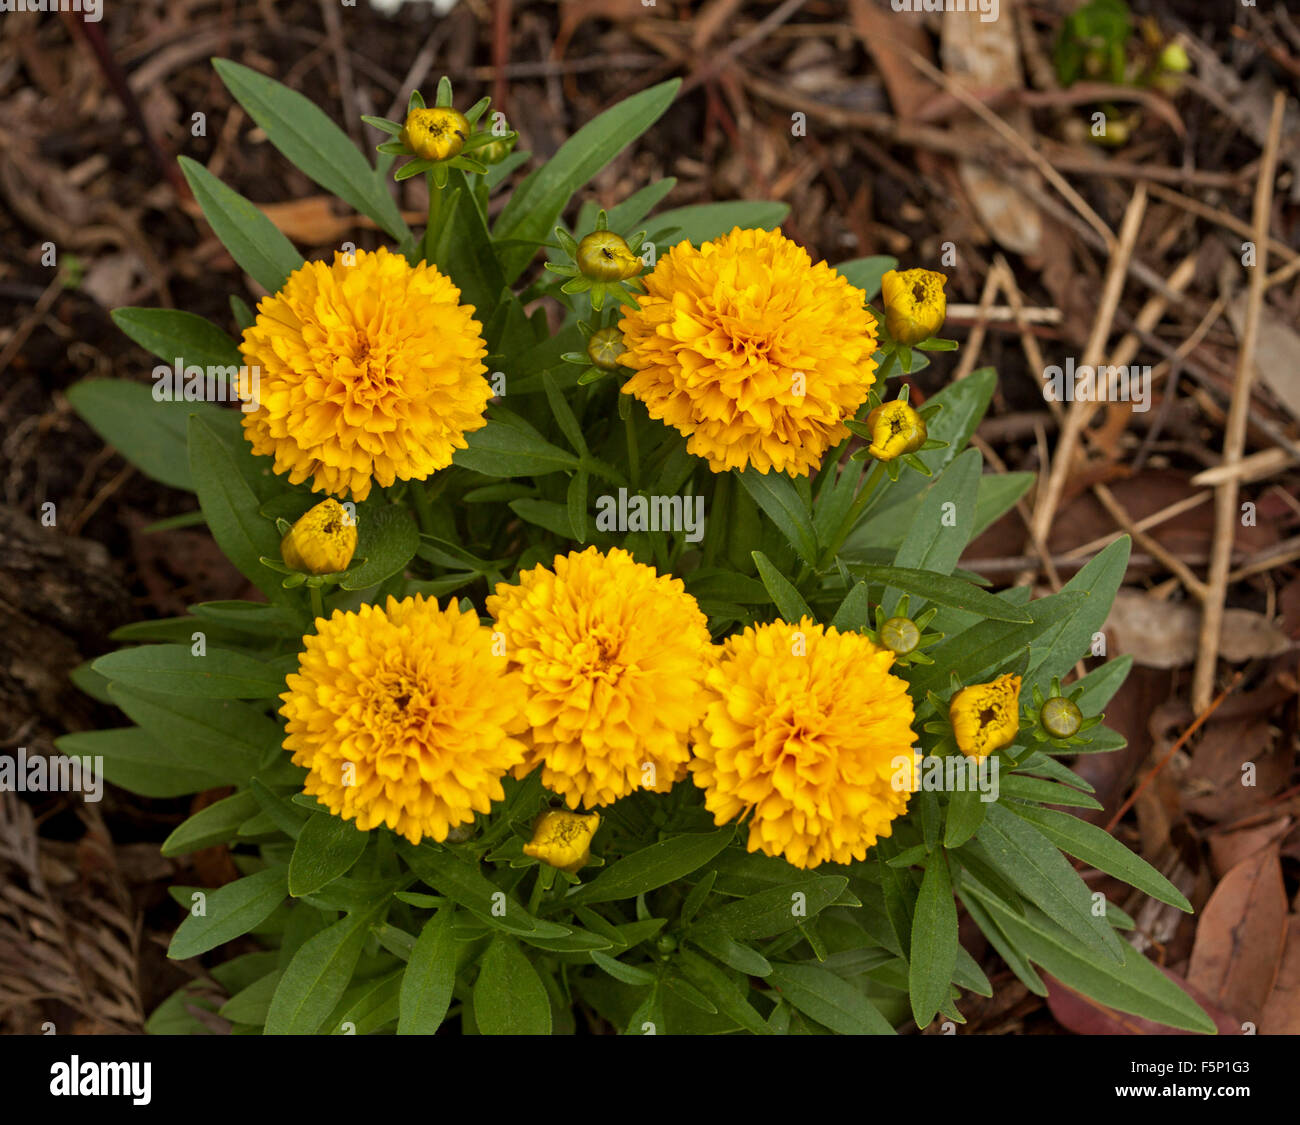 Cluster of bright yellow double flowers and emerald green leaves of Coreopsis 'Solana', perennial garden plant Stock Photo